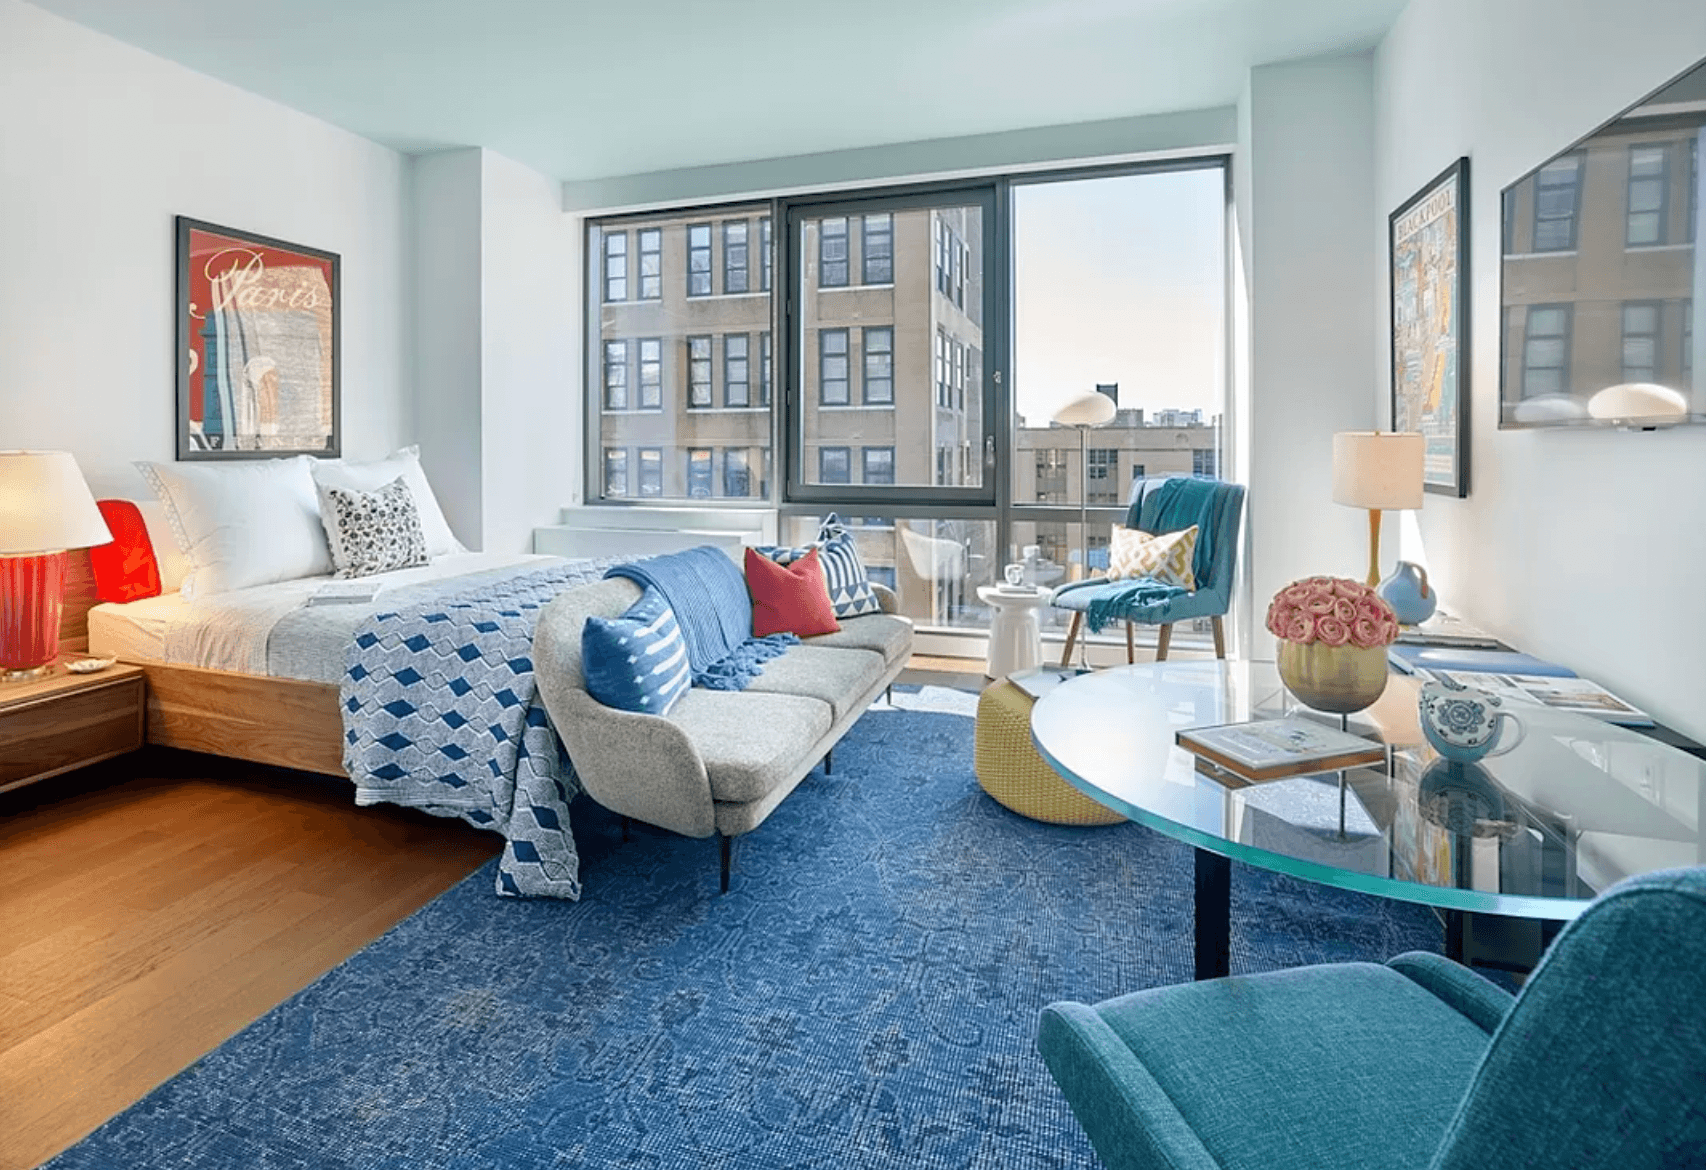 Limited! Short term rental in Hudson Yard - 6 month | The best amenities and location